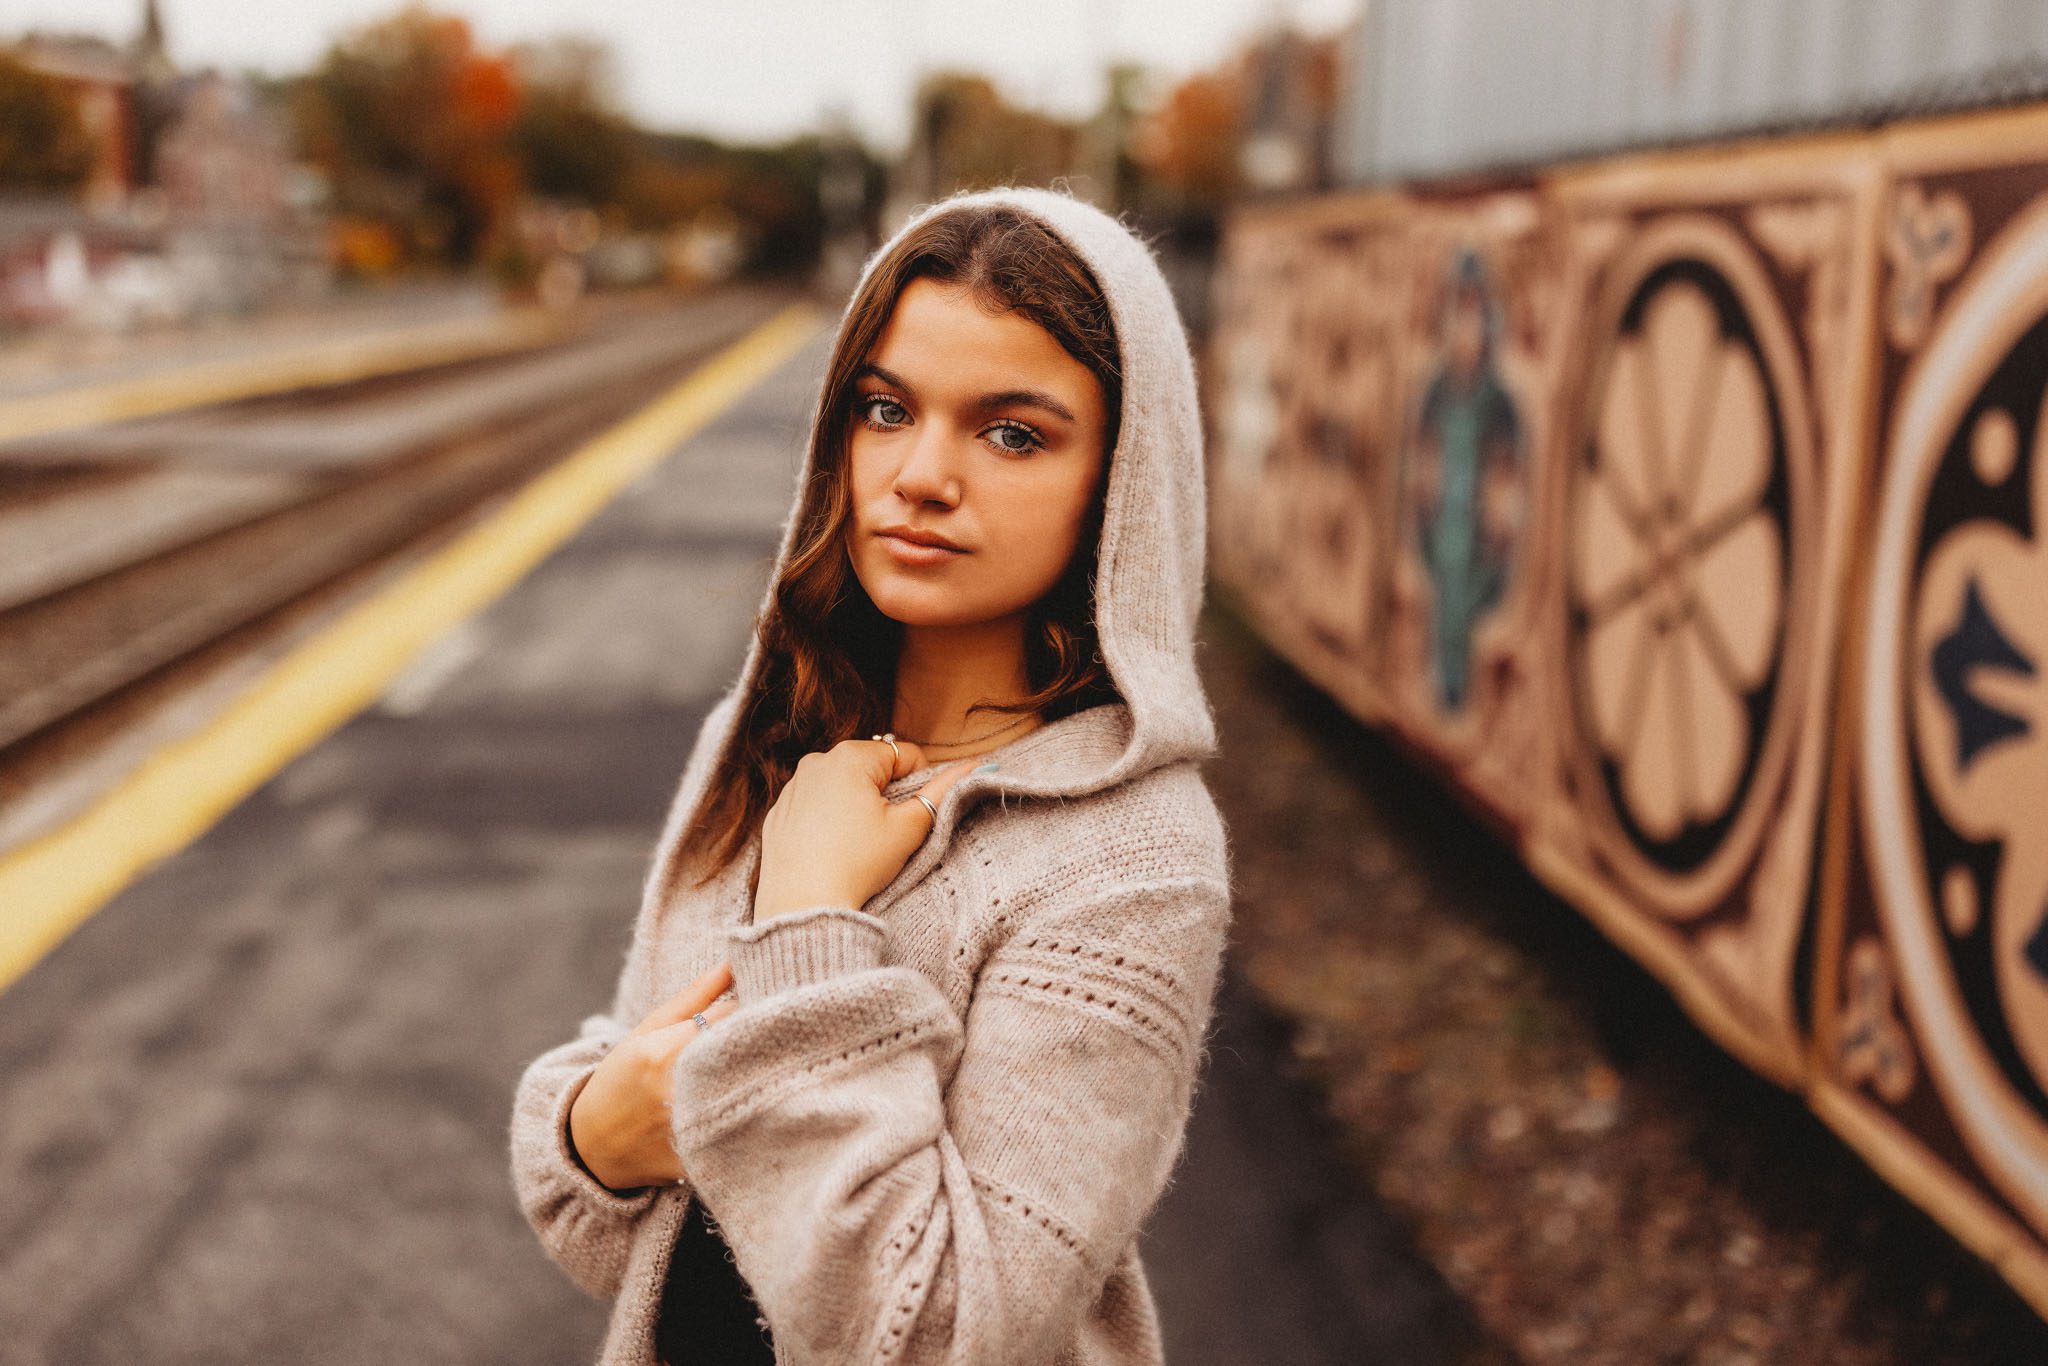 Senior portrait of a young woman wearing a hoodie sweater at a train station in Massachusetts photographed by Sean Wytrwal of J&S Photography